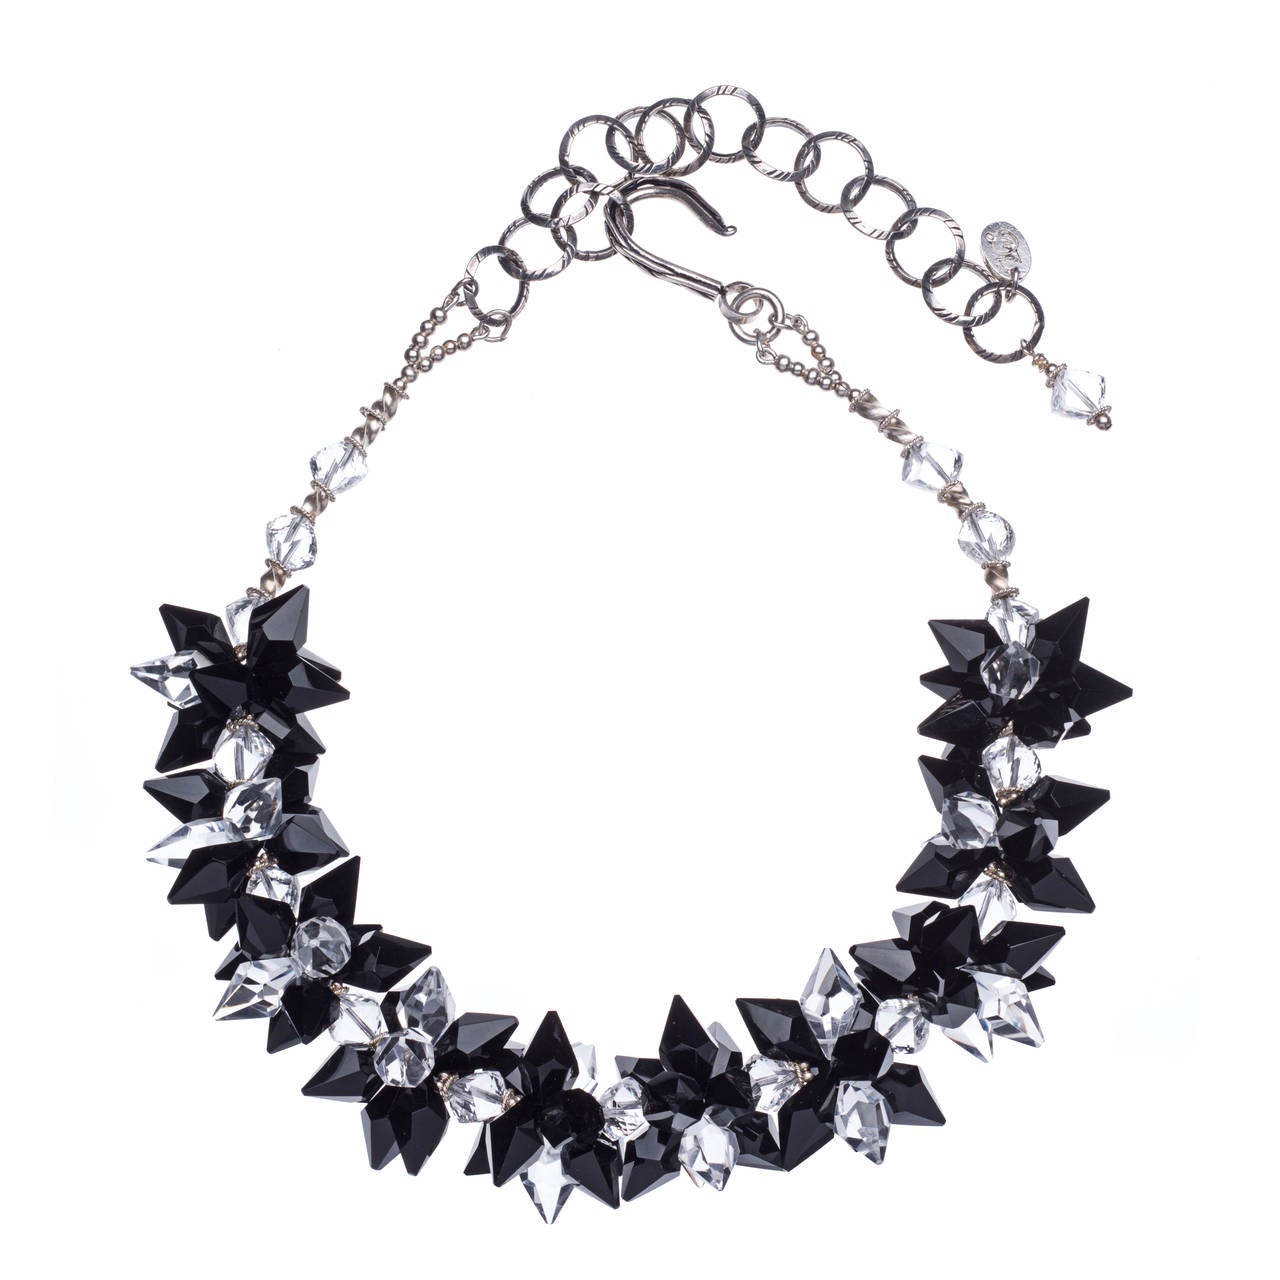 Crystal Quartz, Onyx and Sterling Silver Necklace (adjustable length from 17 inches to 23 inches)